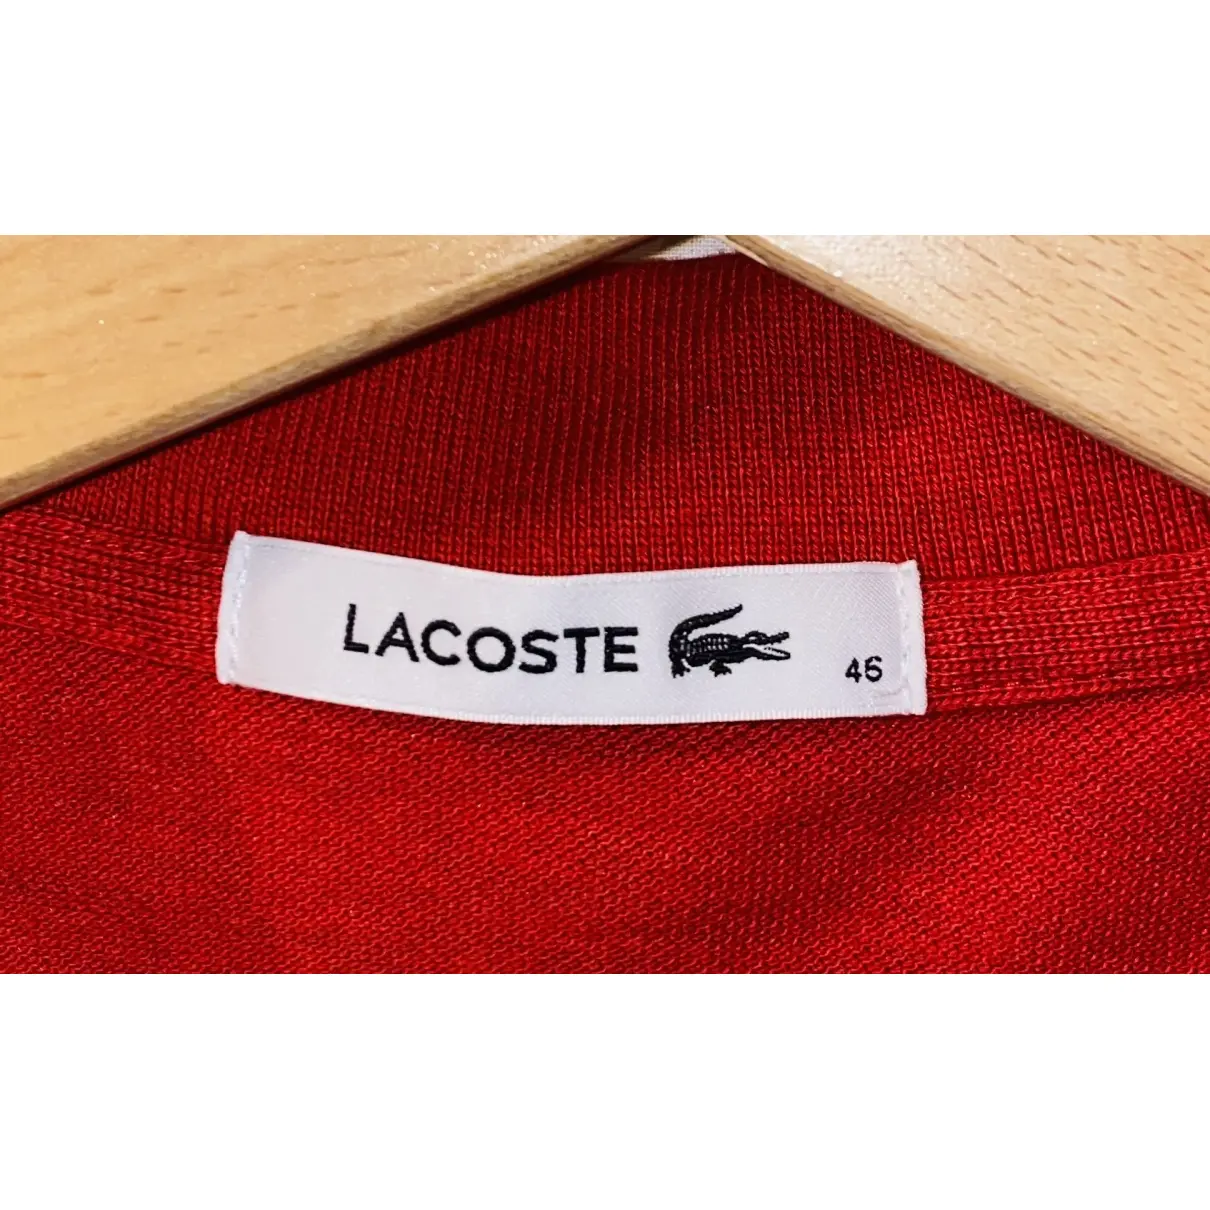 Buy Lacoste Red Cotton Top online